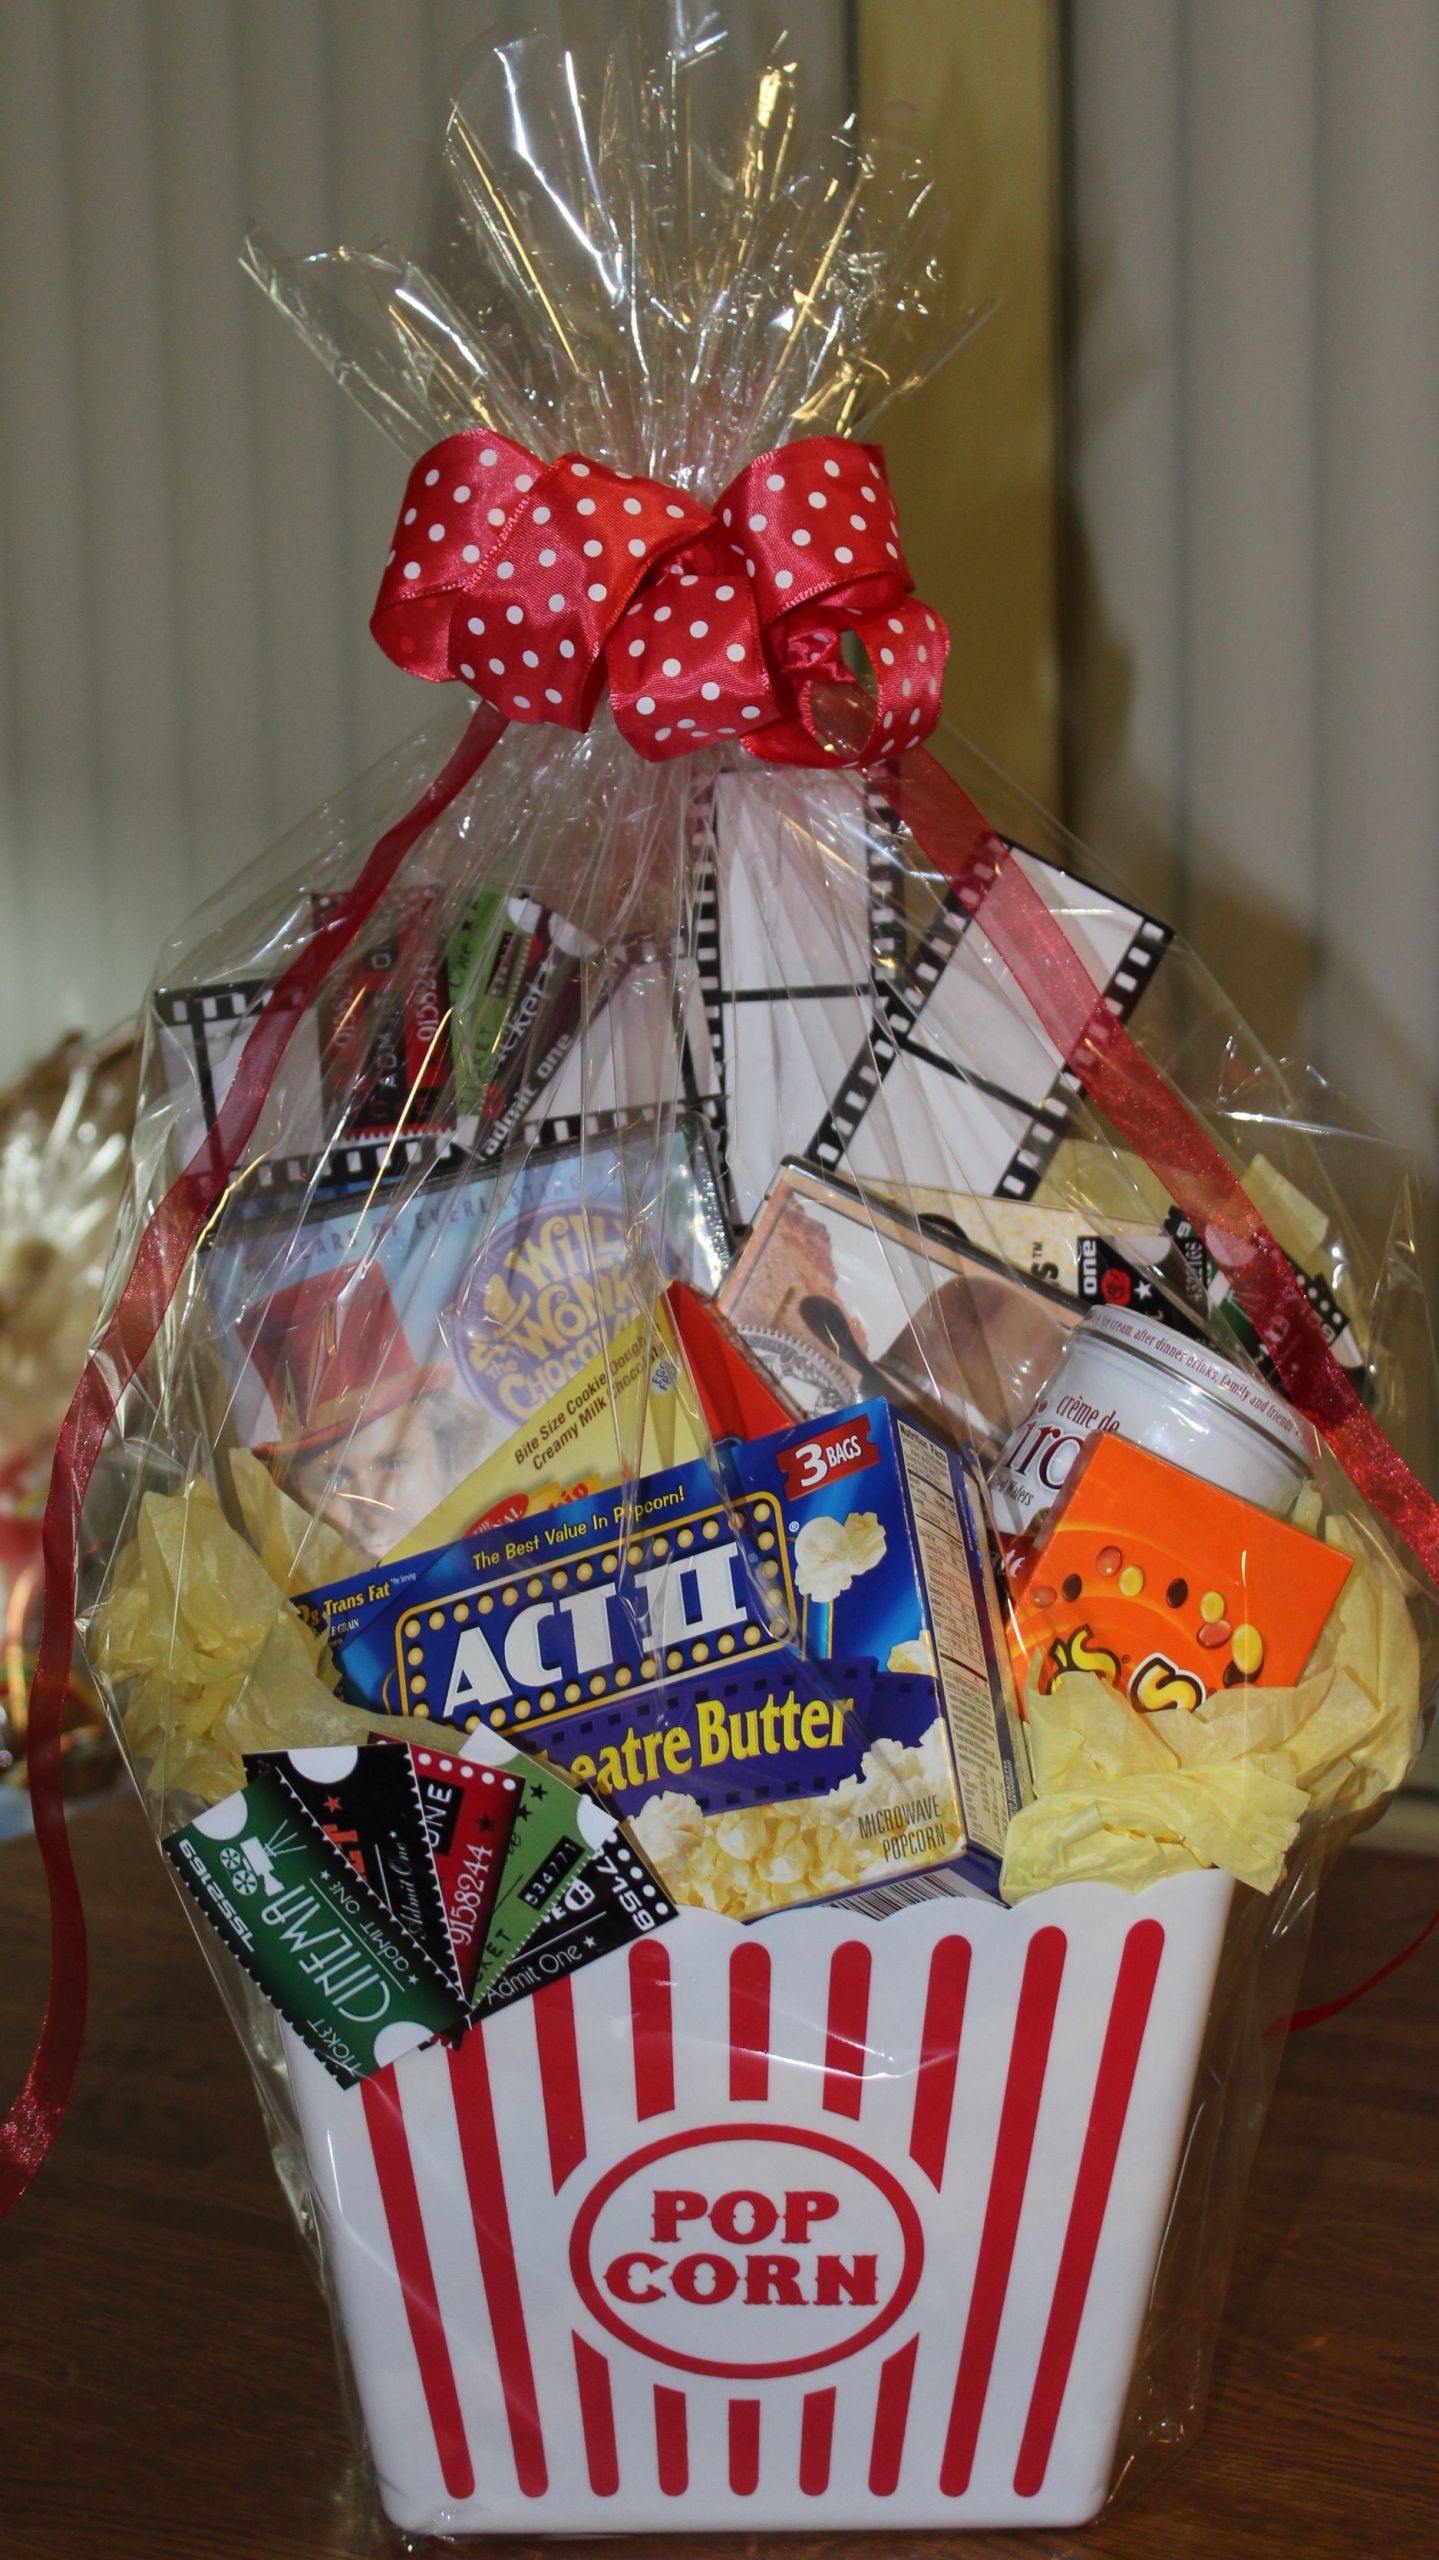 Popcorn Movie Gift Basket Ideas
 Home Movie night basket I must find a bucket like this